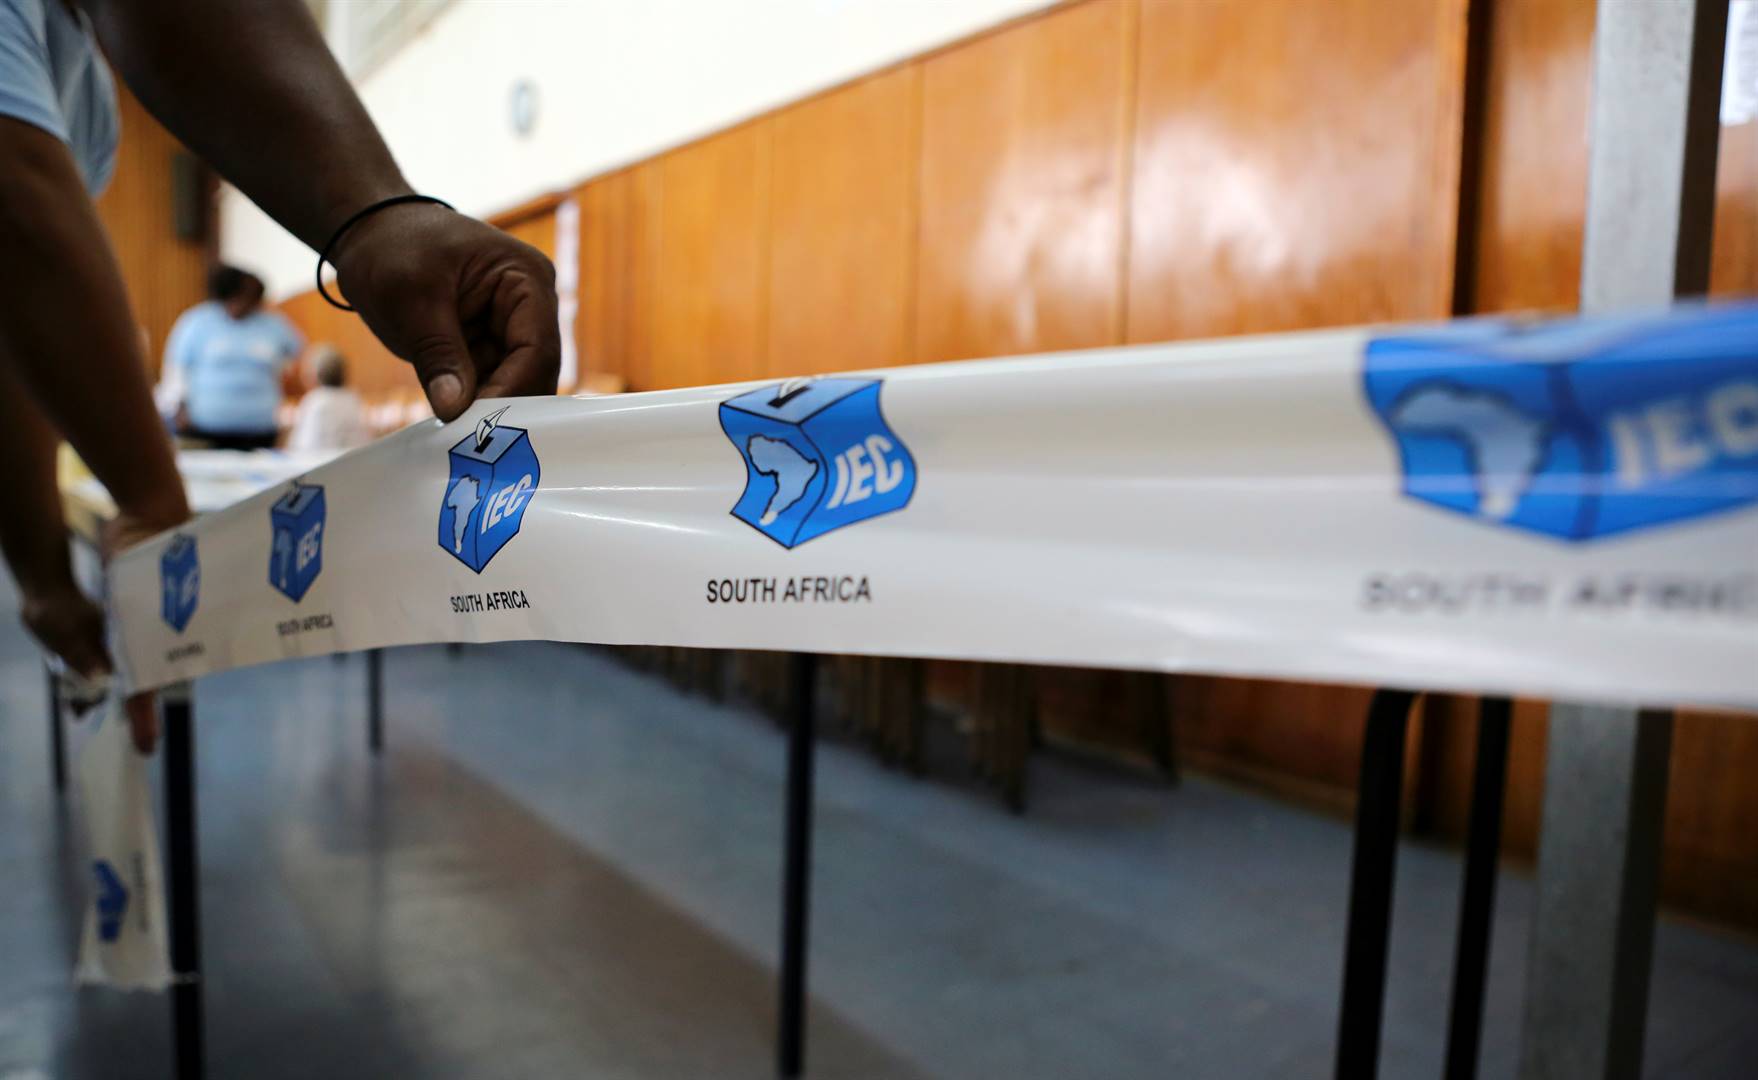 An election official sets up tape during preparations for the elections at a voting station in Cape Town. Picture: Sumaya Hisham/Reuters